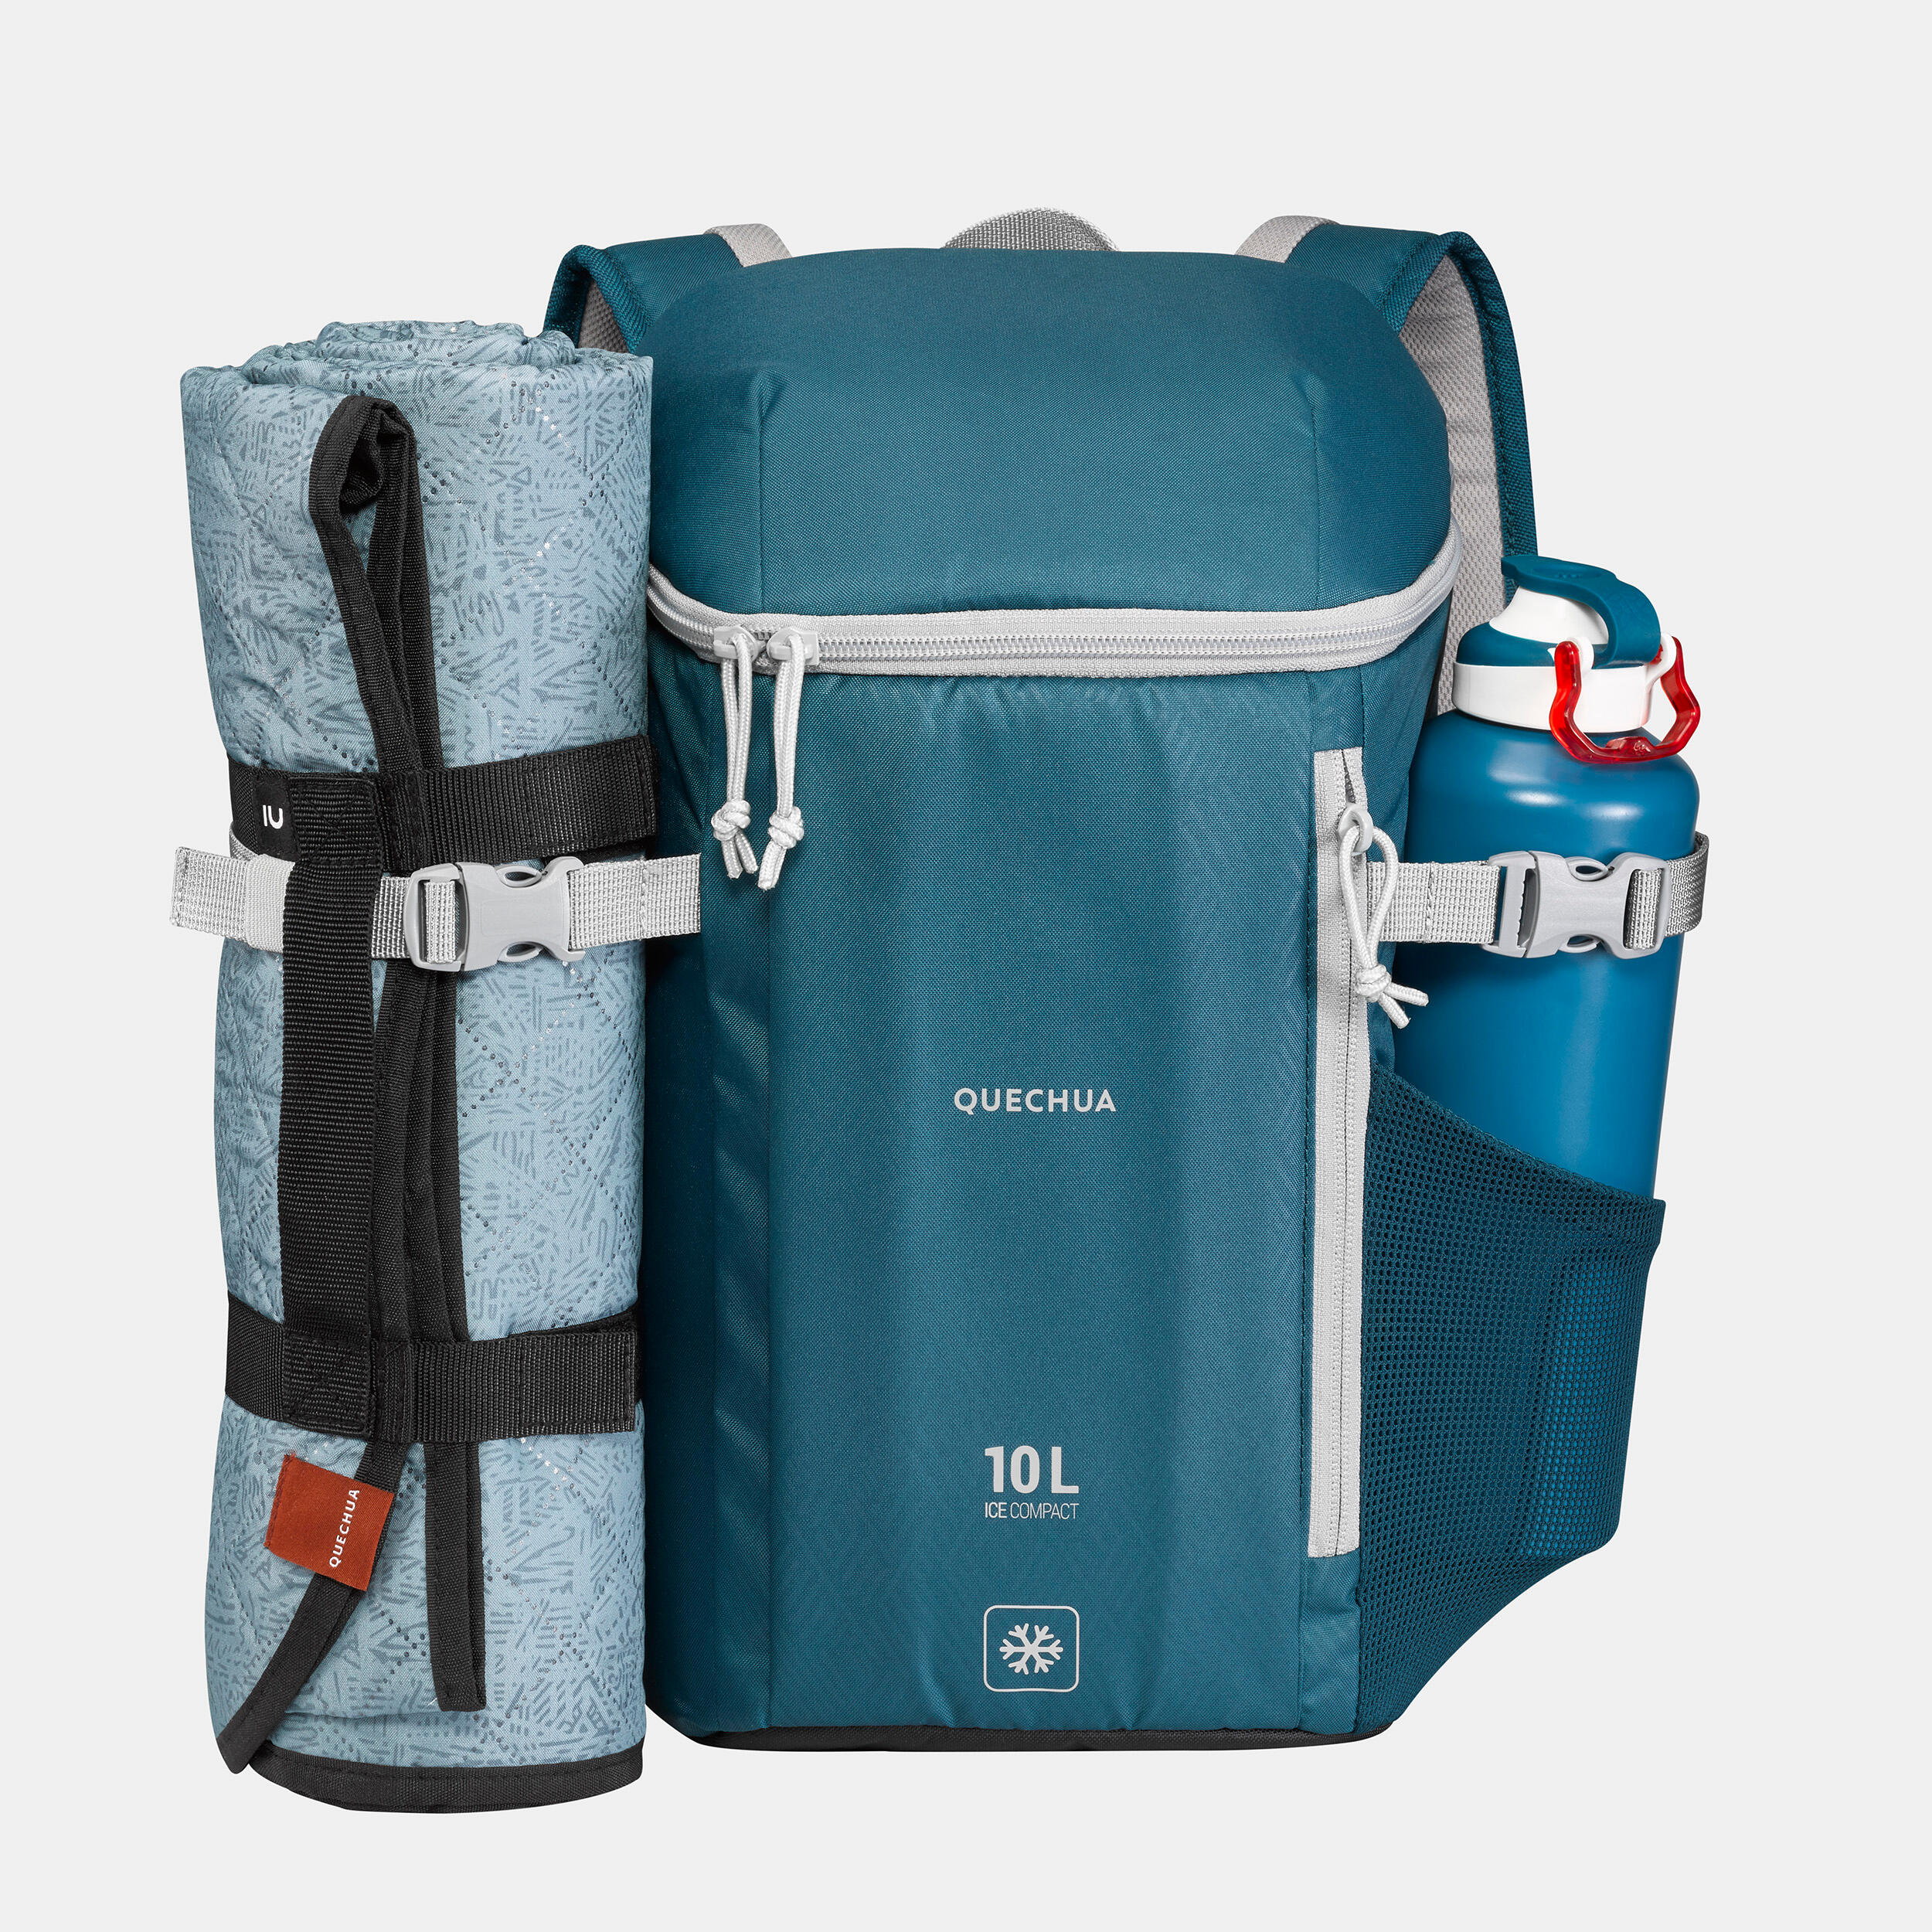 Sac à dos isotherme 10L - NH Ice compact 100 - QUECHUA